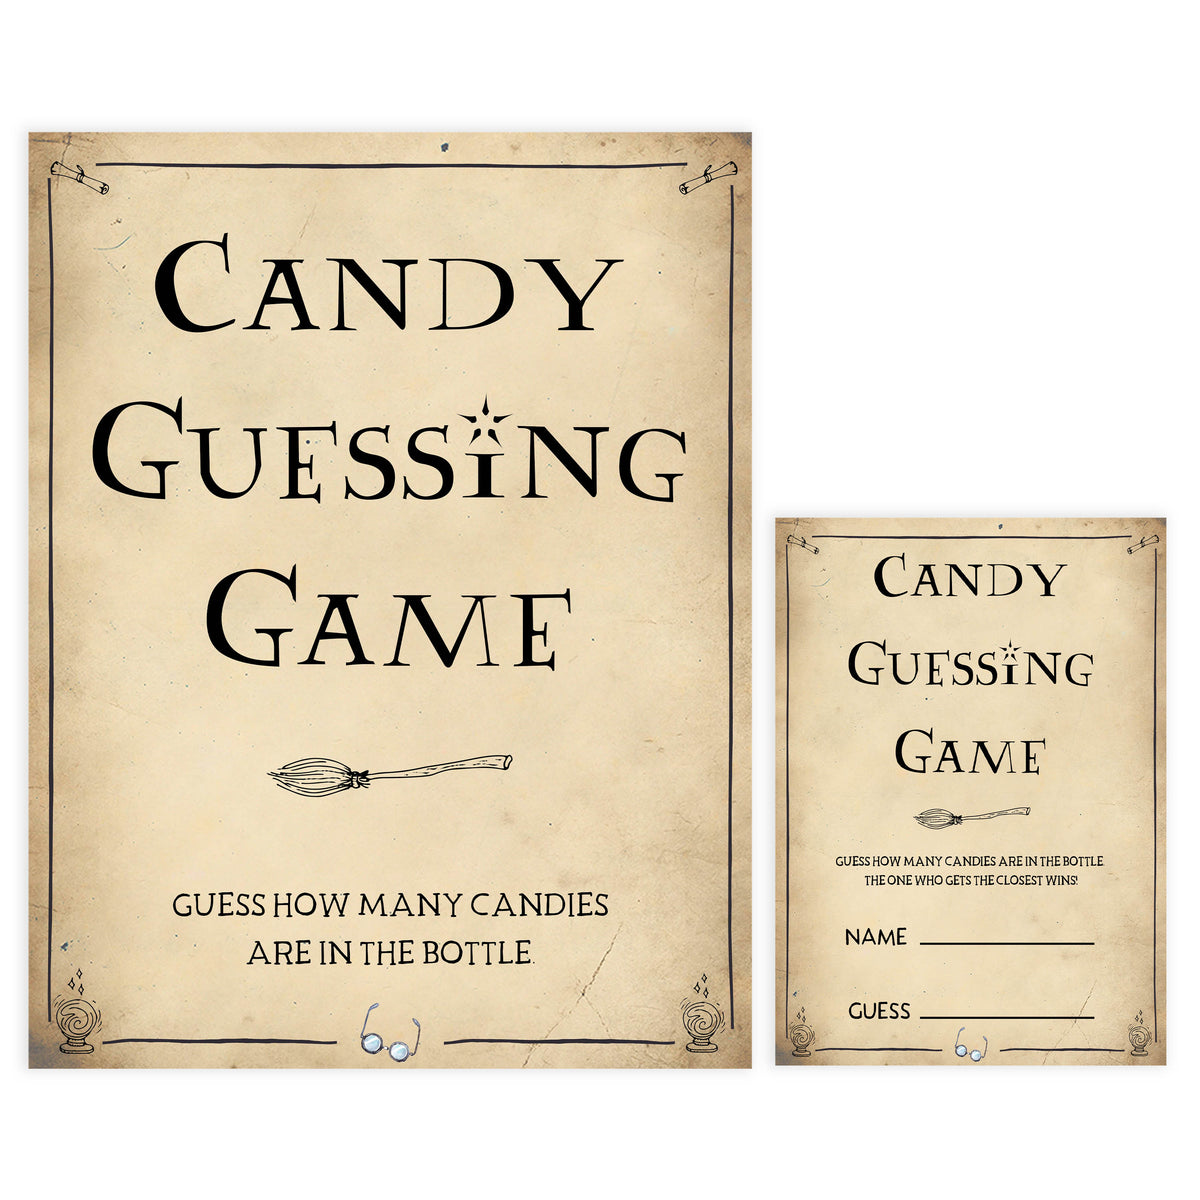 Candy Guessing Baby Game, Wizard baby shower games, printable baby shower games, Harry Potter baby games, Harry Potter baby shower, fun baby shower games,  fun baby ideas